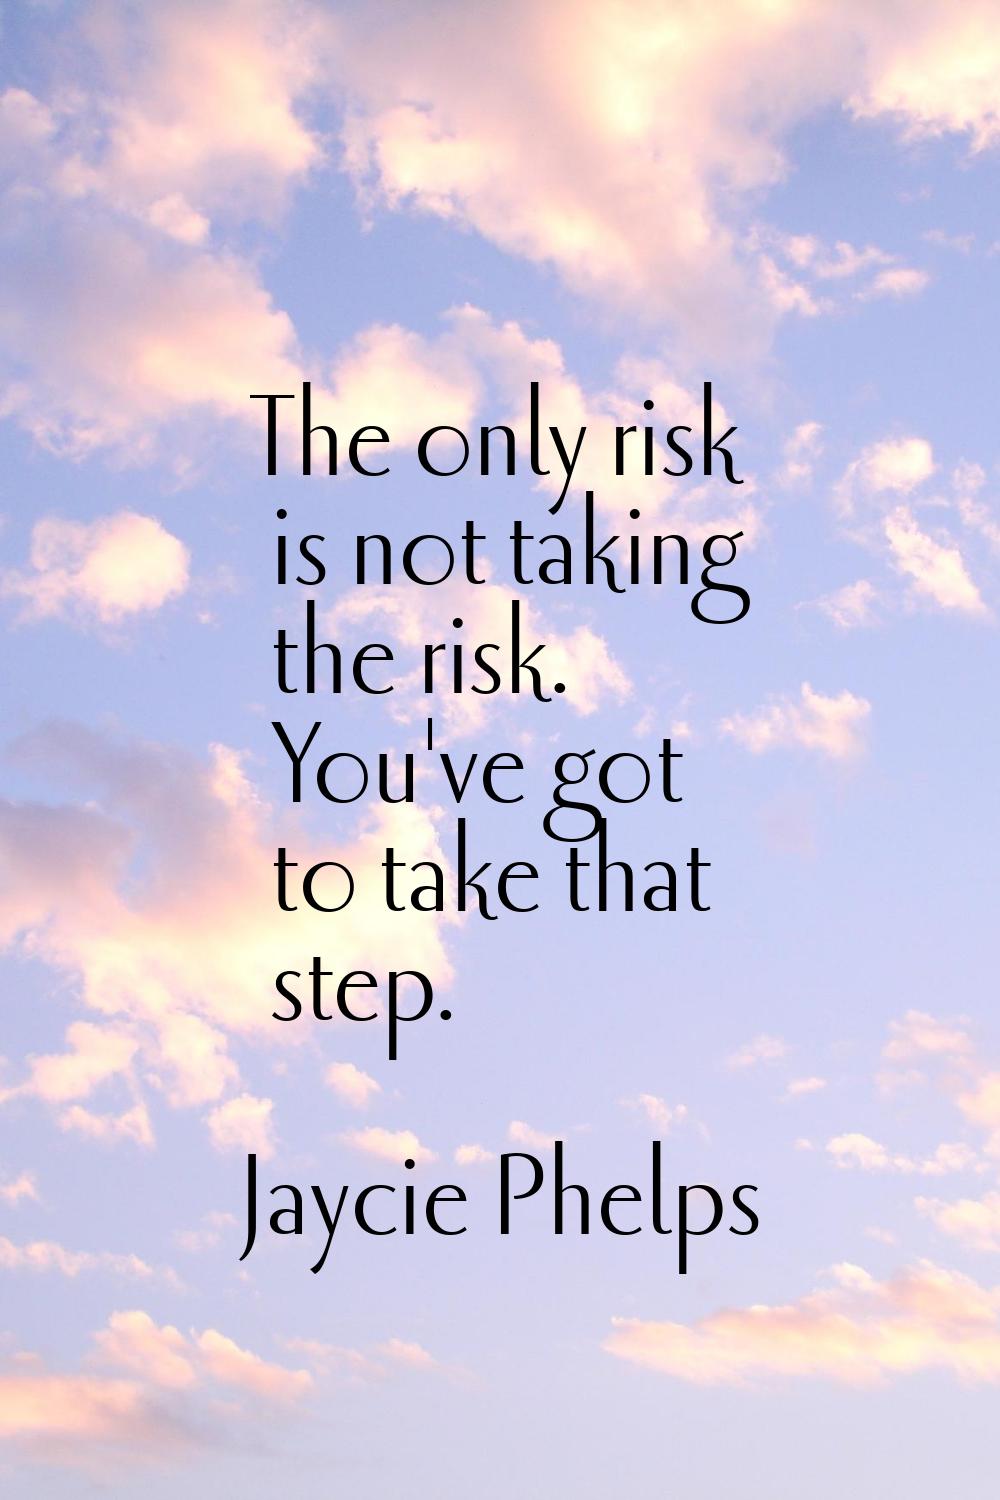 The only risk is not taking the risk. You've got to take that step.